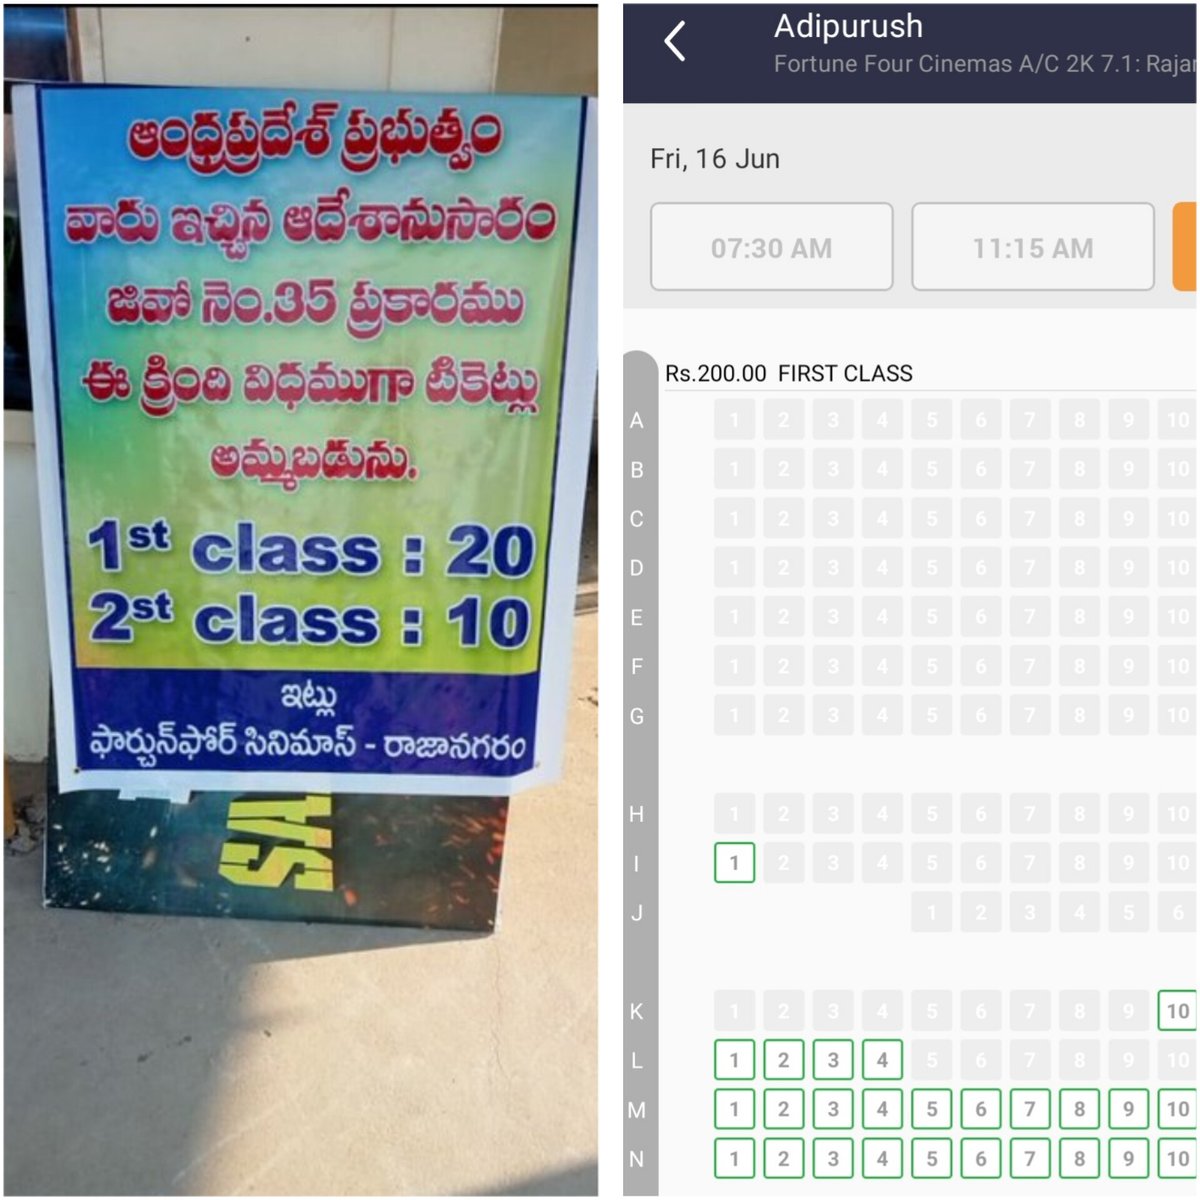 Bheemla Nayak Day 1 prices vs Adi Purush day 1 prices in same theatre. Just a sample how this Hitler's government in AP tried to dent Chief #PawanKalyan's only income source 'Cinema' . 

Btw Nothing harsh on #Prabhas or #Adipurush. Always wishes him the best for being so grounded